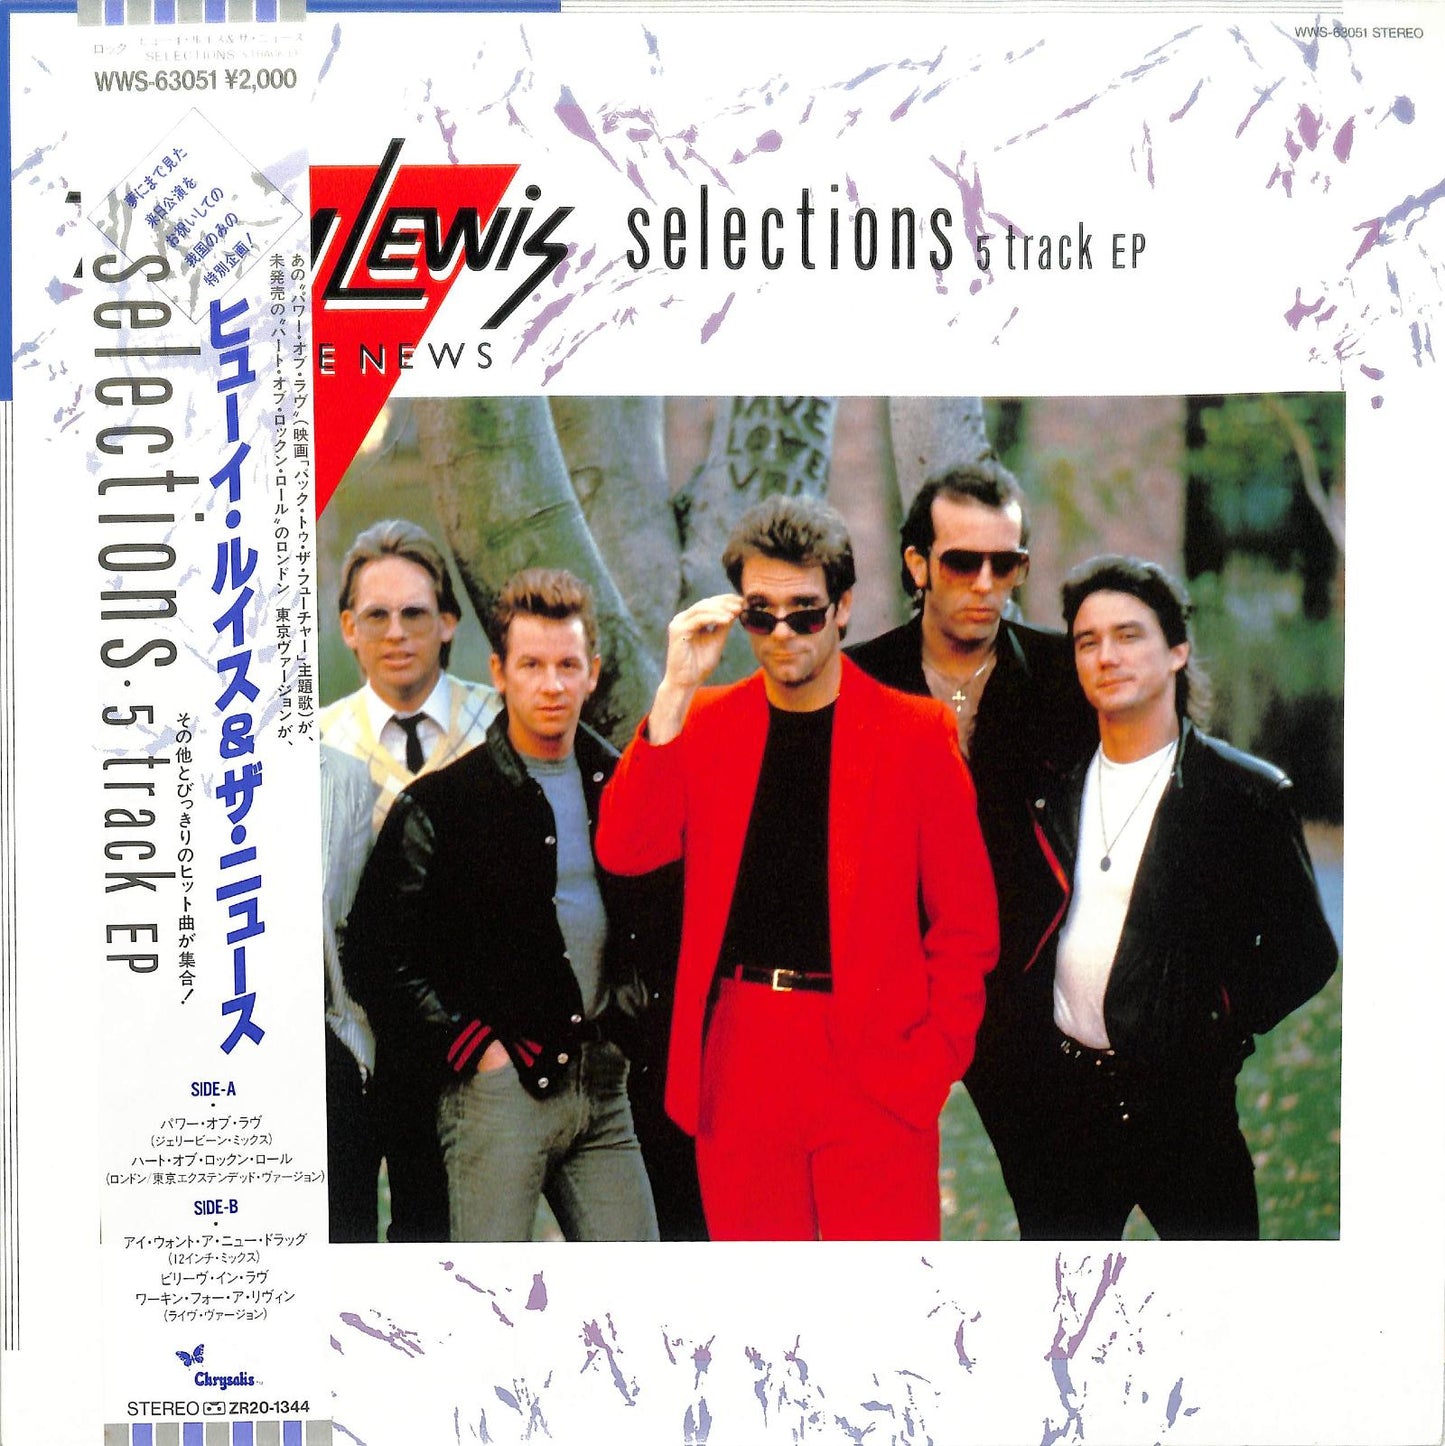 HUEY LEWIS AND THE NEWS - Selections